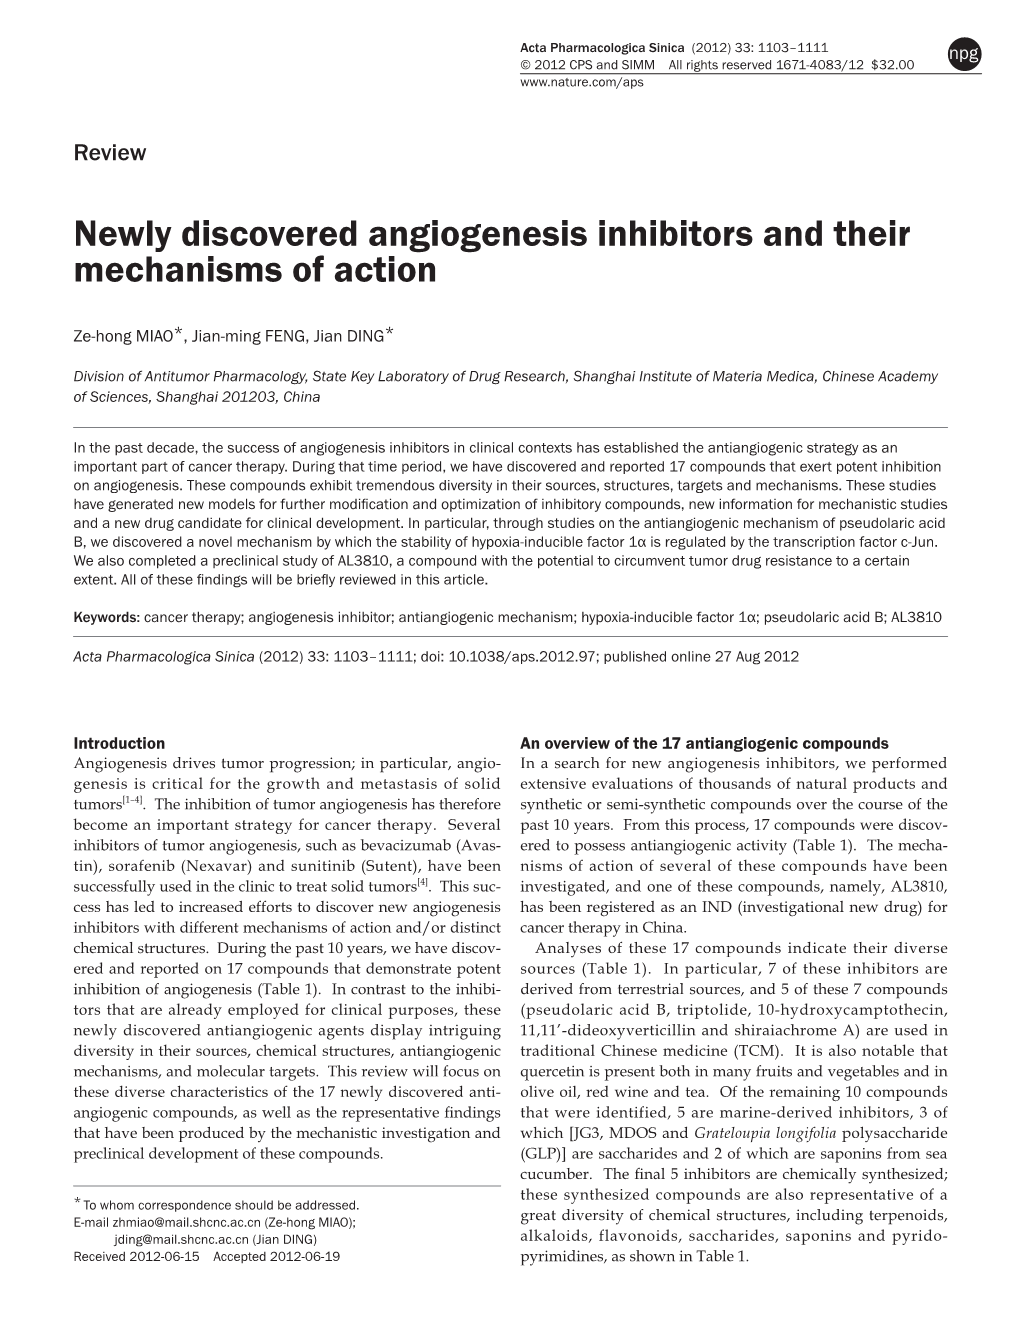 Newly Discovered Angiogenesis Inhibitors and Their Mechanisms of Action